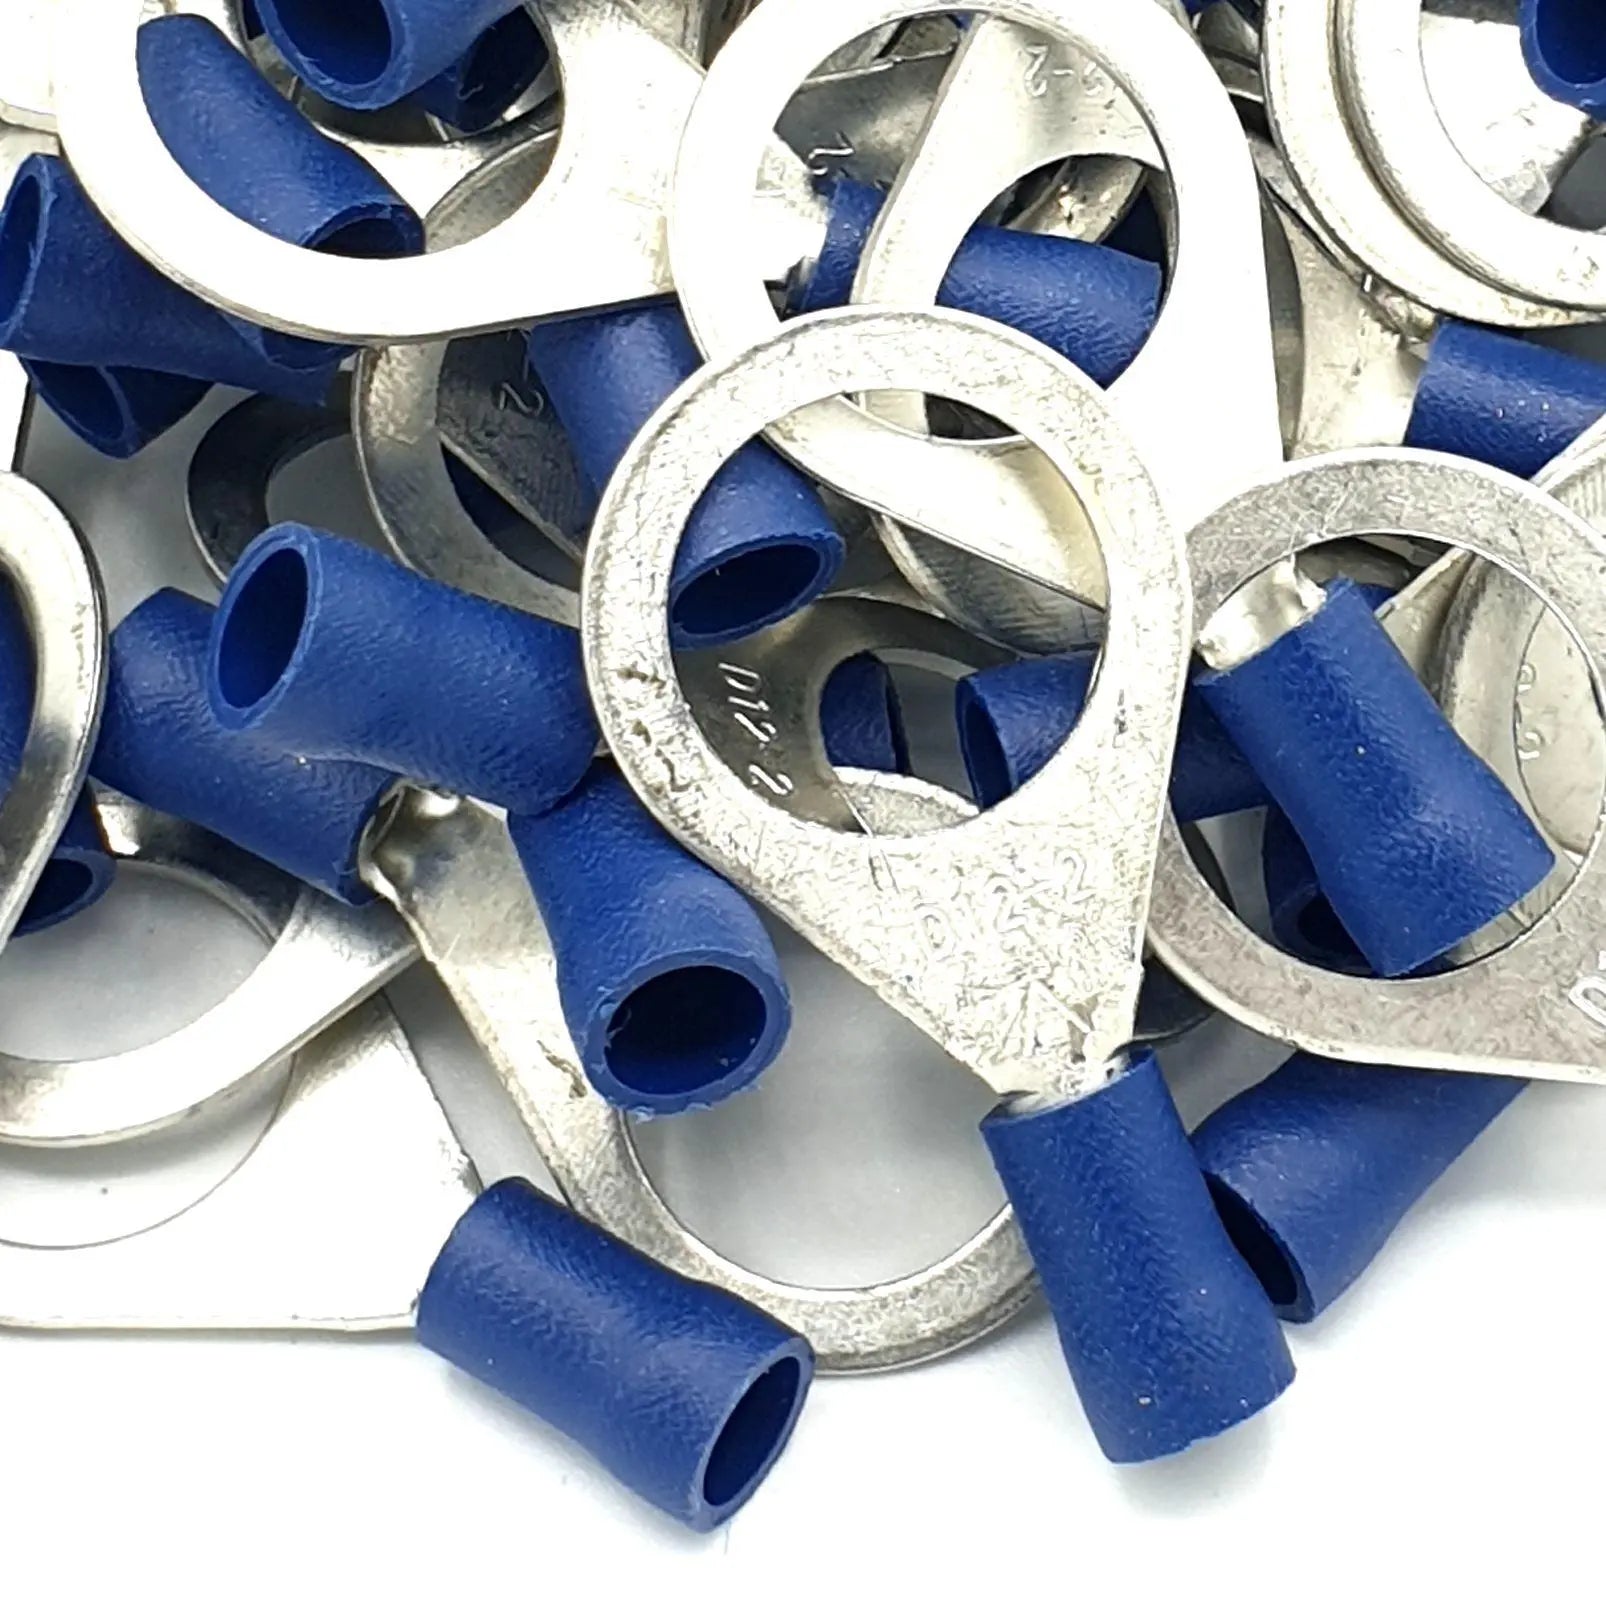 100pcs Blue Insulated Crimp Ring Terminals Connectors Electrical Consumables